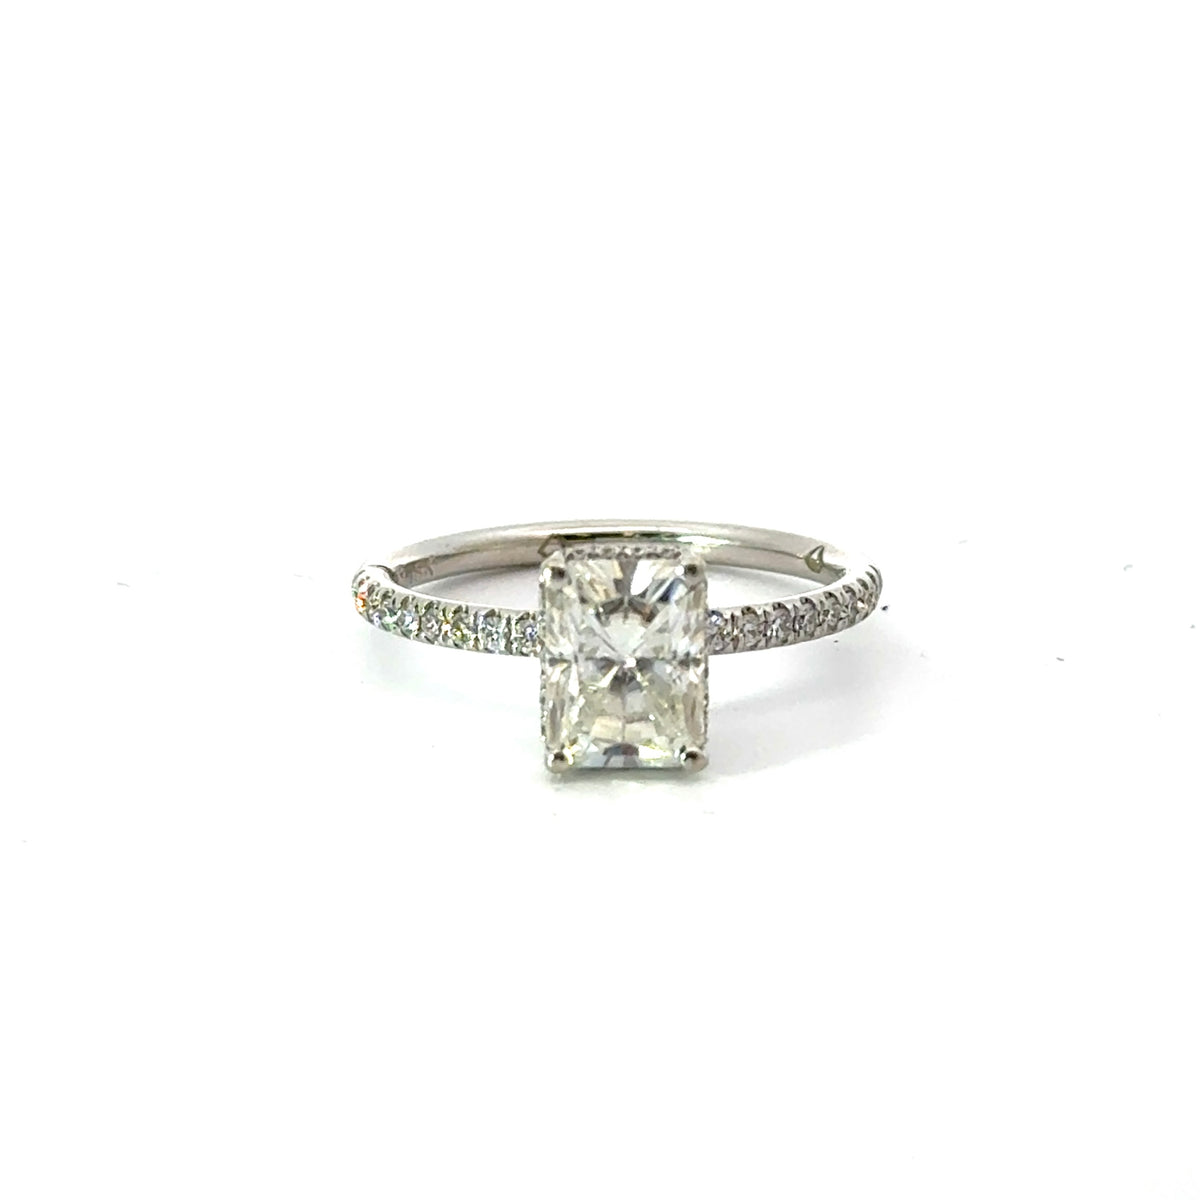 Radiant Cut Reverse Halo and Italian Pave Engagement Ring Design- Choice of .50ct / .80ct / 1.00ct or 1.20ct Centre Diamond